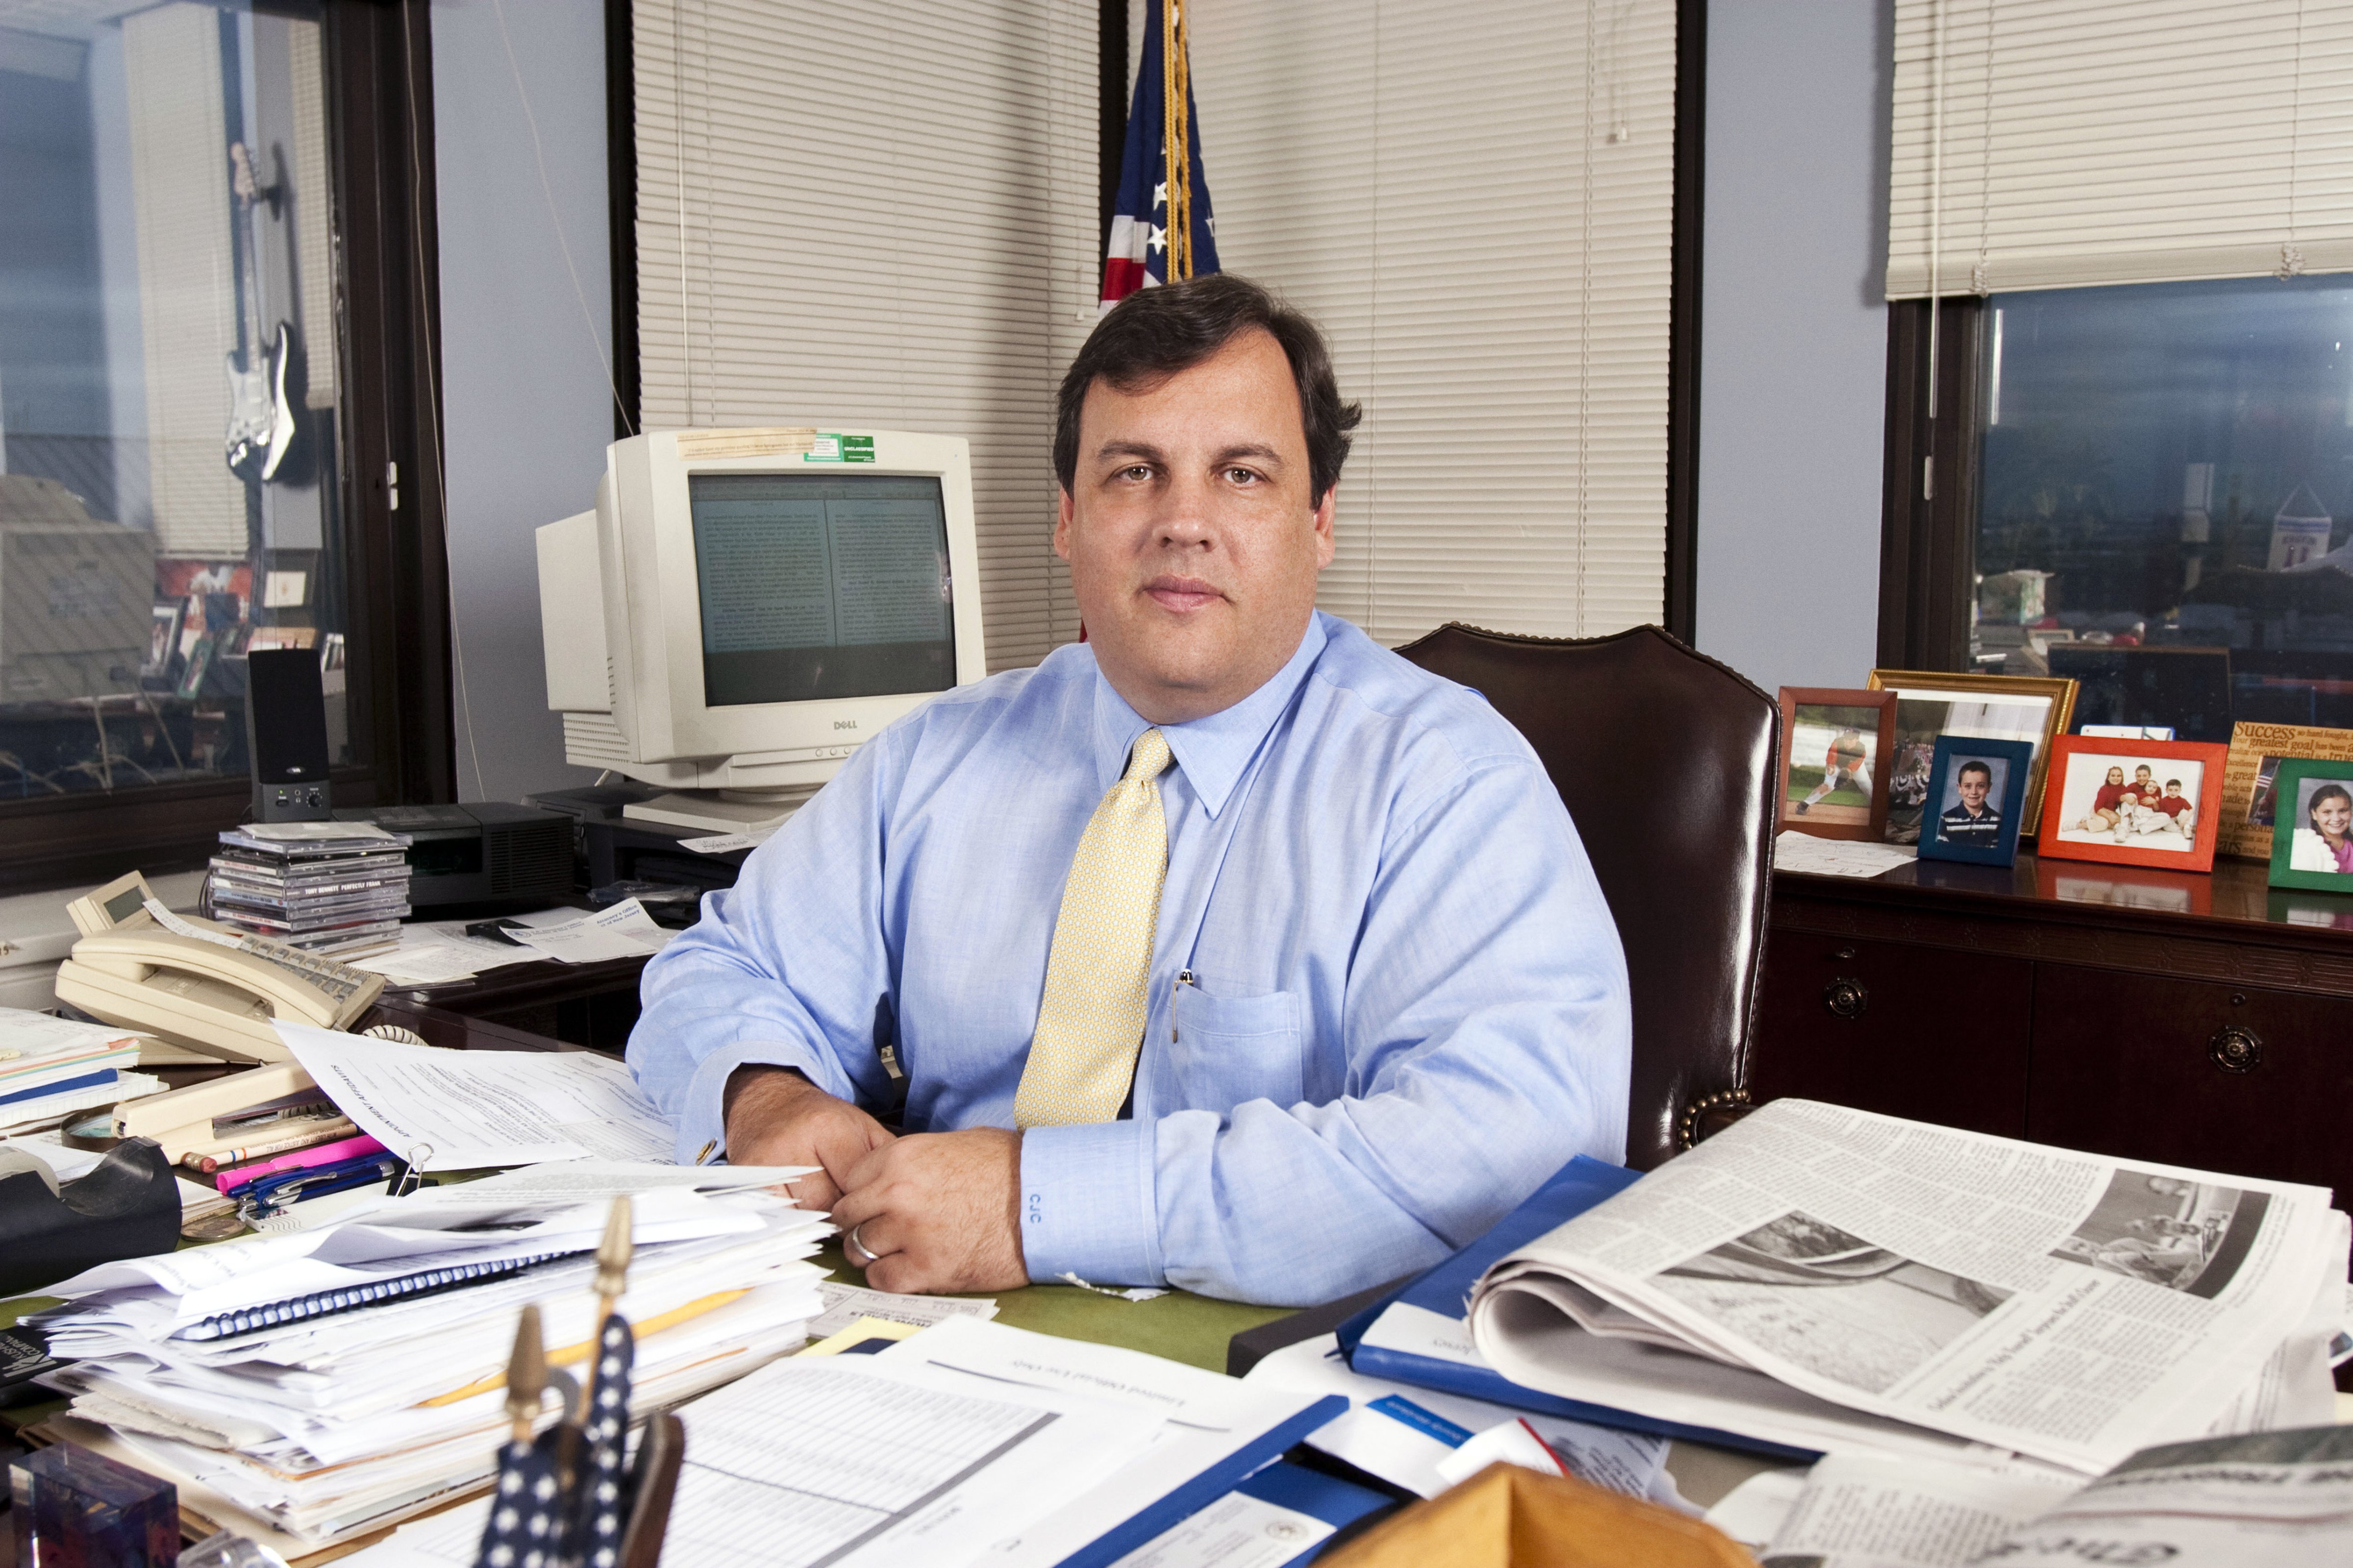 Chris Christie, New Jersey Monthly, April 17, 2007